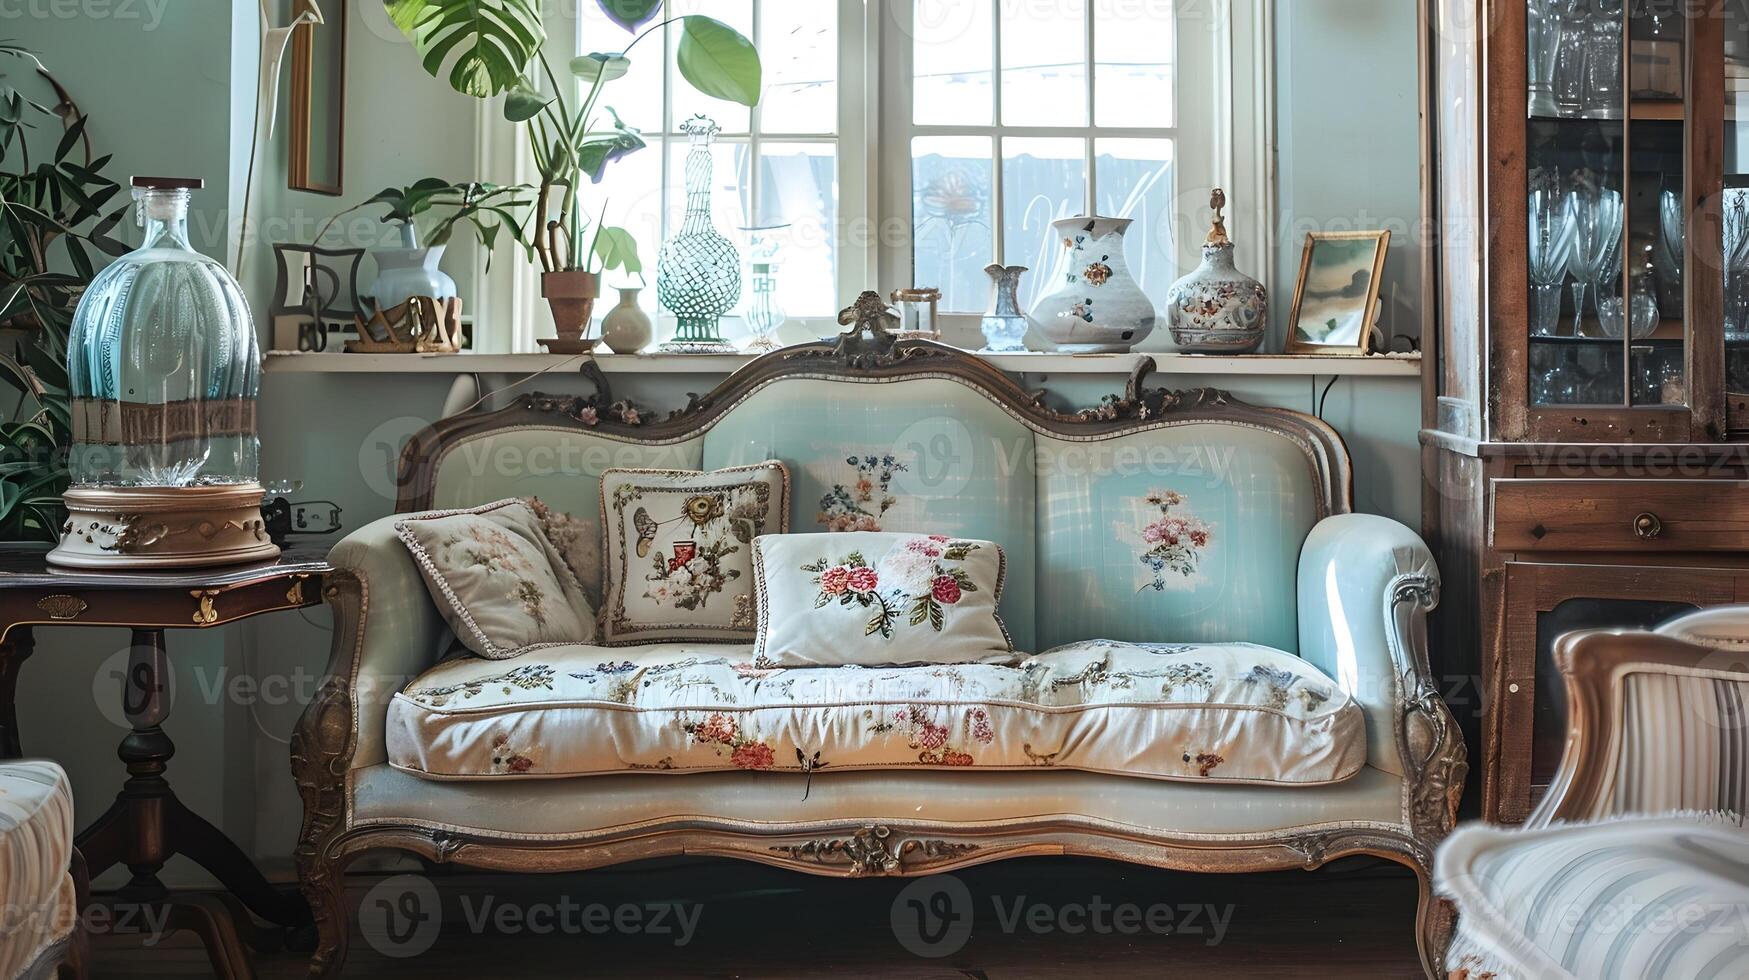 Elegant and Cozy Vintage-Inspired Living Space with Antique Furnishings and Floral Decor photo